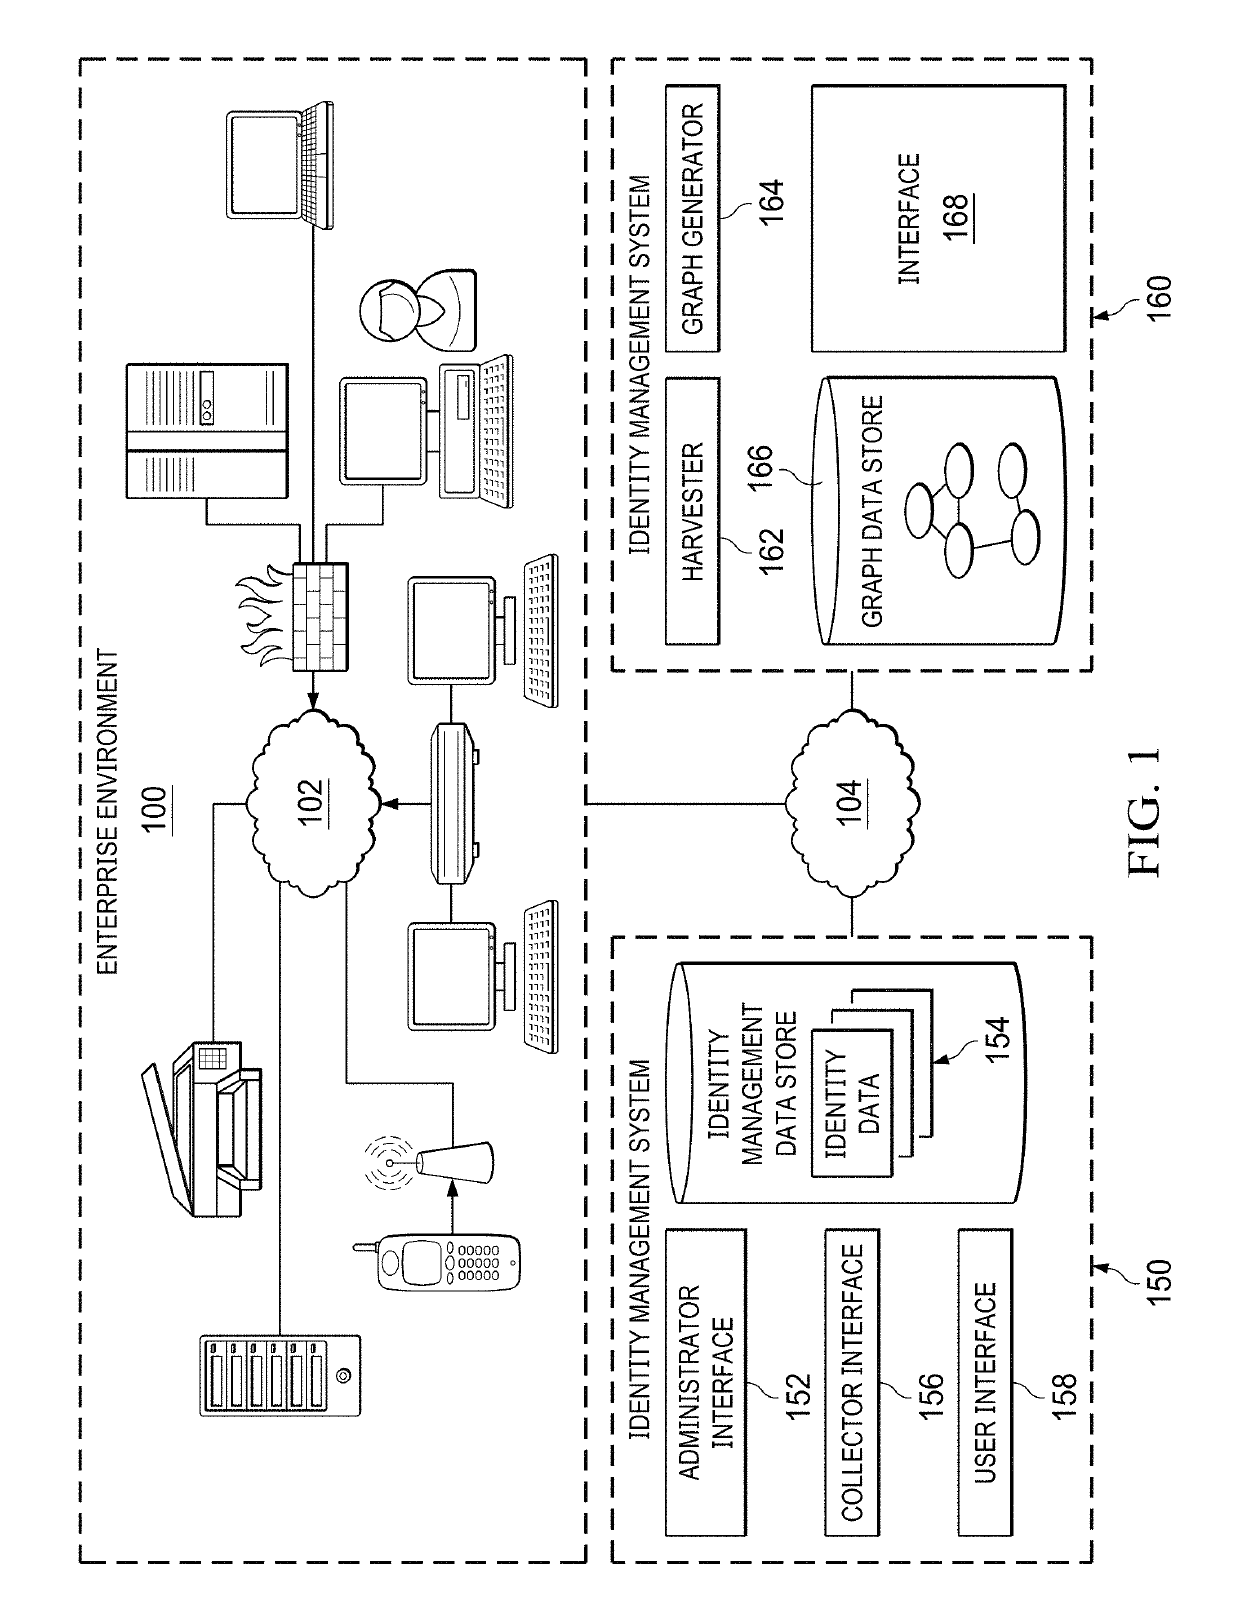 System and method for intelligent agents for decision support in network identity graph based identity management artificial intelligence systems